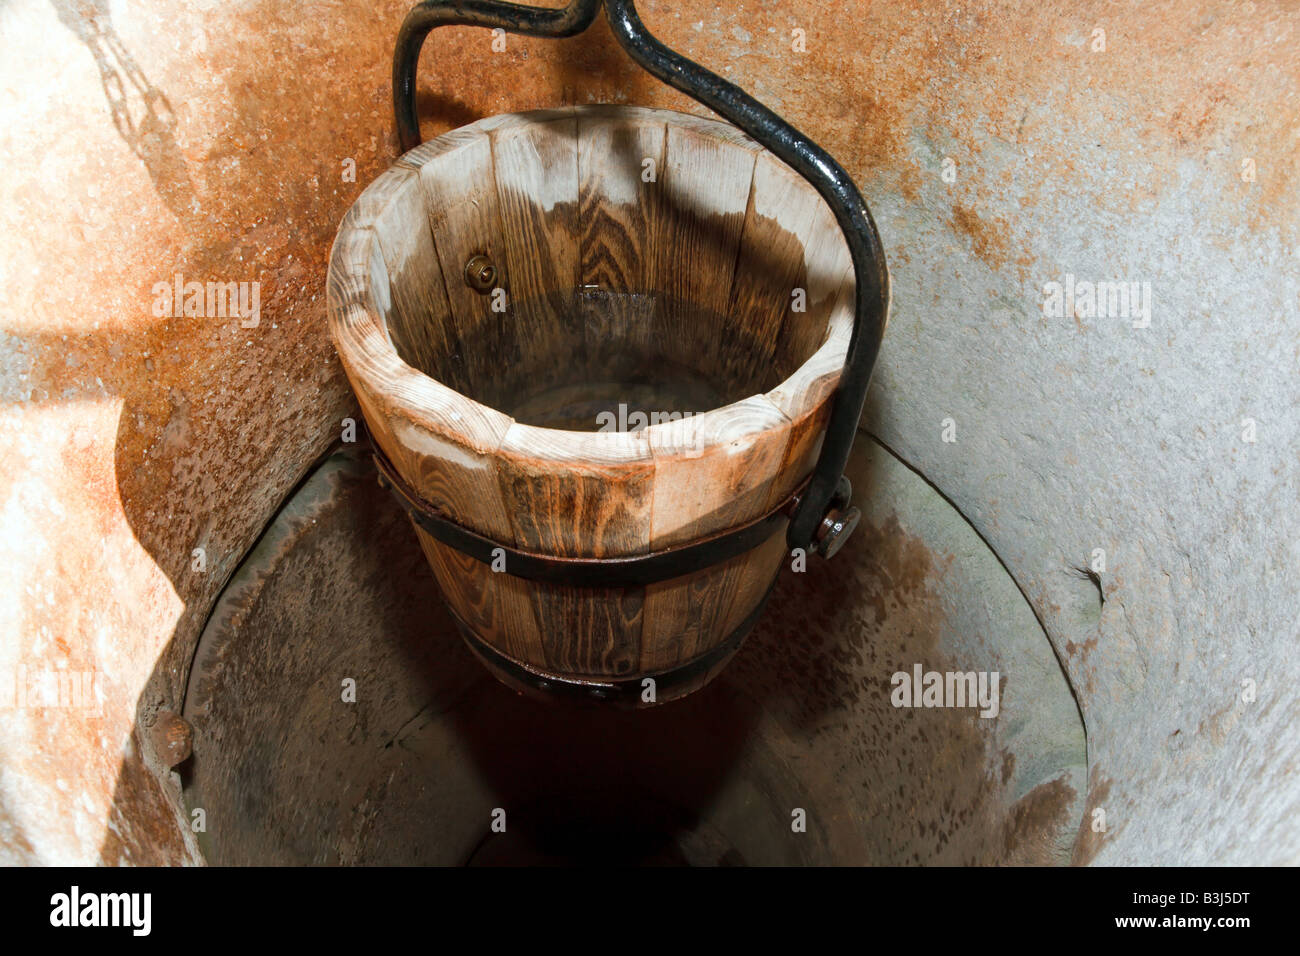 traditional wooden bucket in old stone well Stock Photo